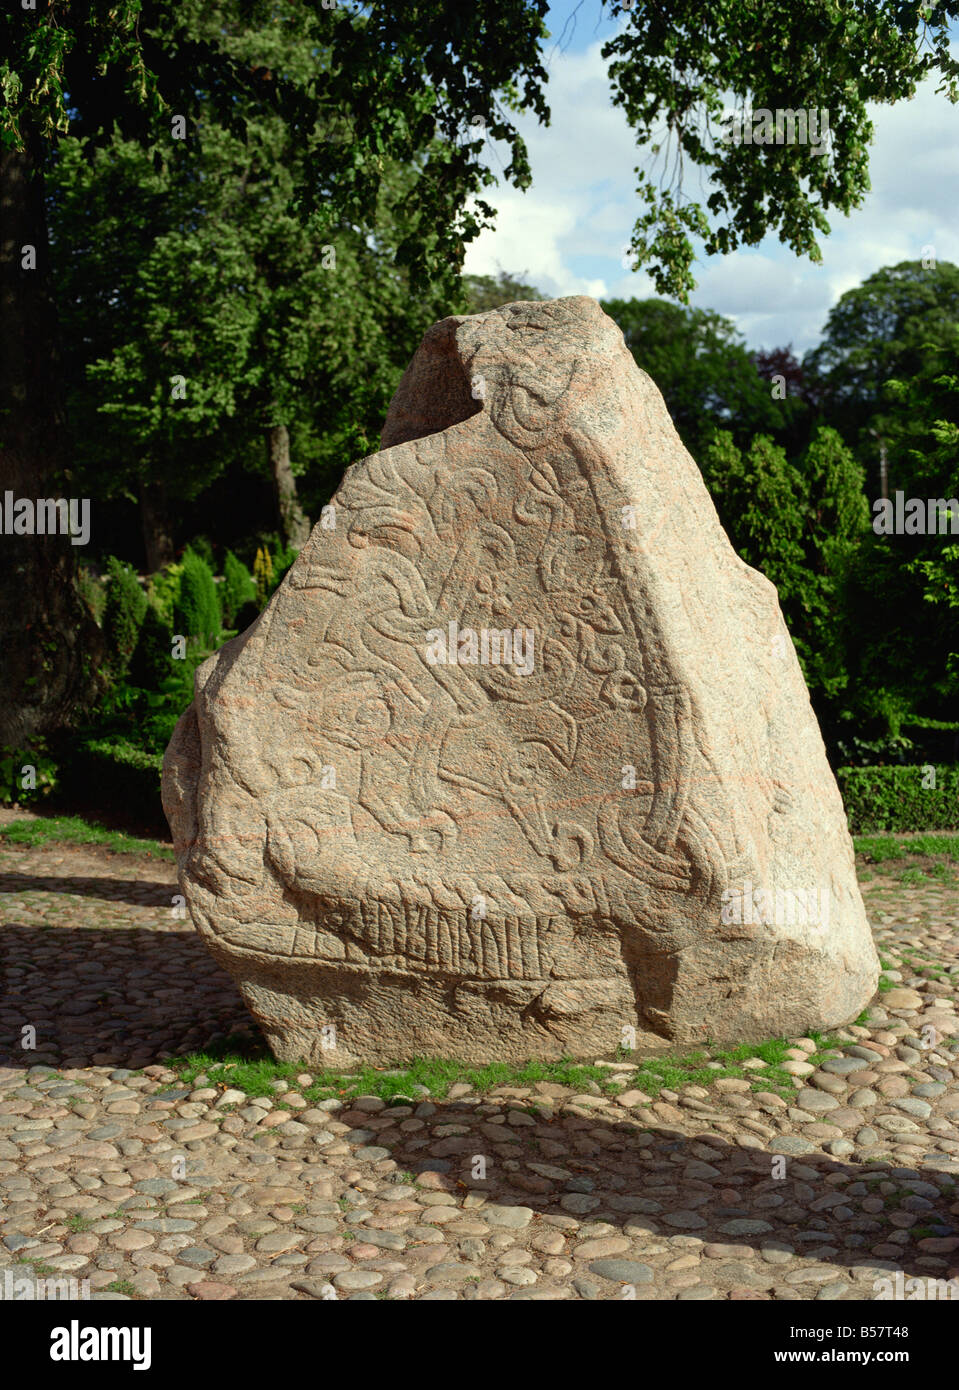 Rune stone referring to burials of Harald Blue Tooth, in Jelling churchyard, near Vejle, Central Jutland, Denmark, Scandinavia Stock Photo